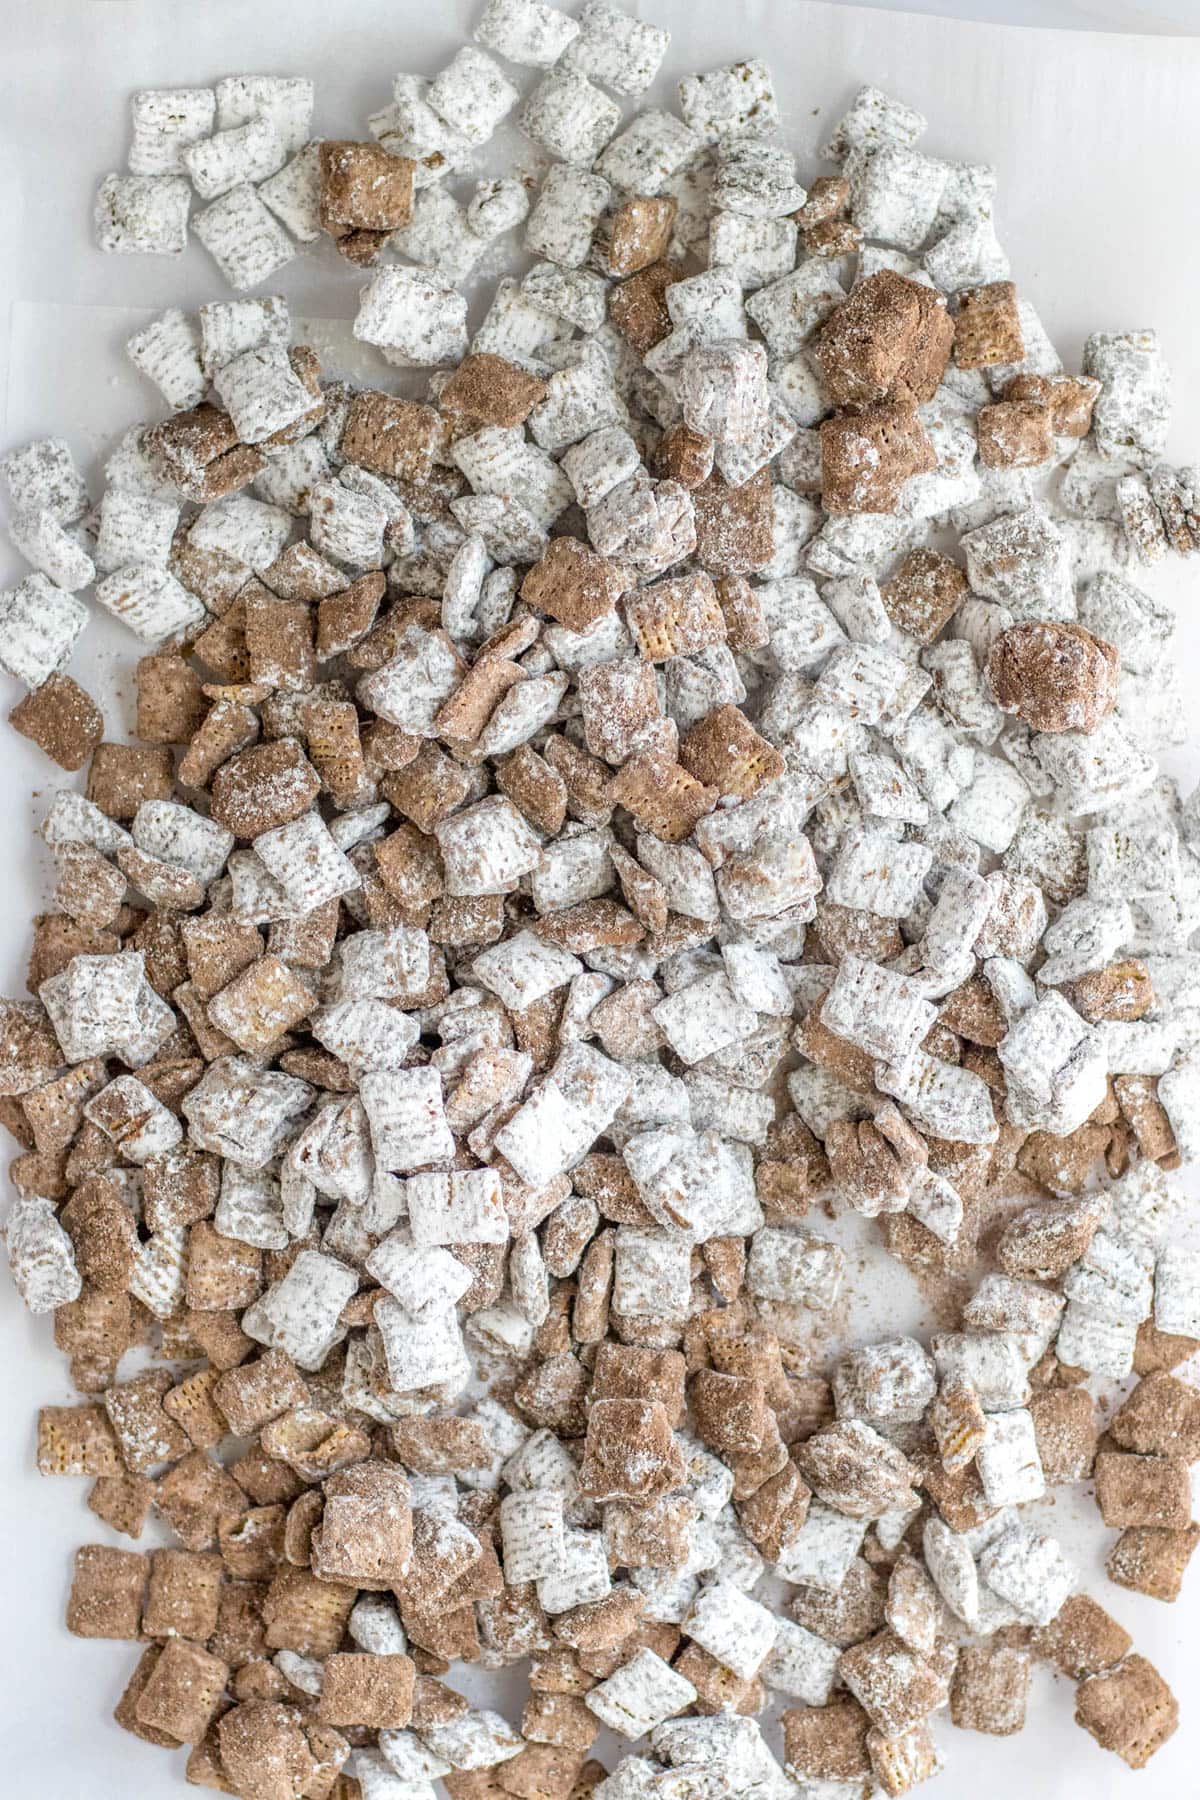 Puppy chow mixture on counter